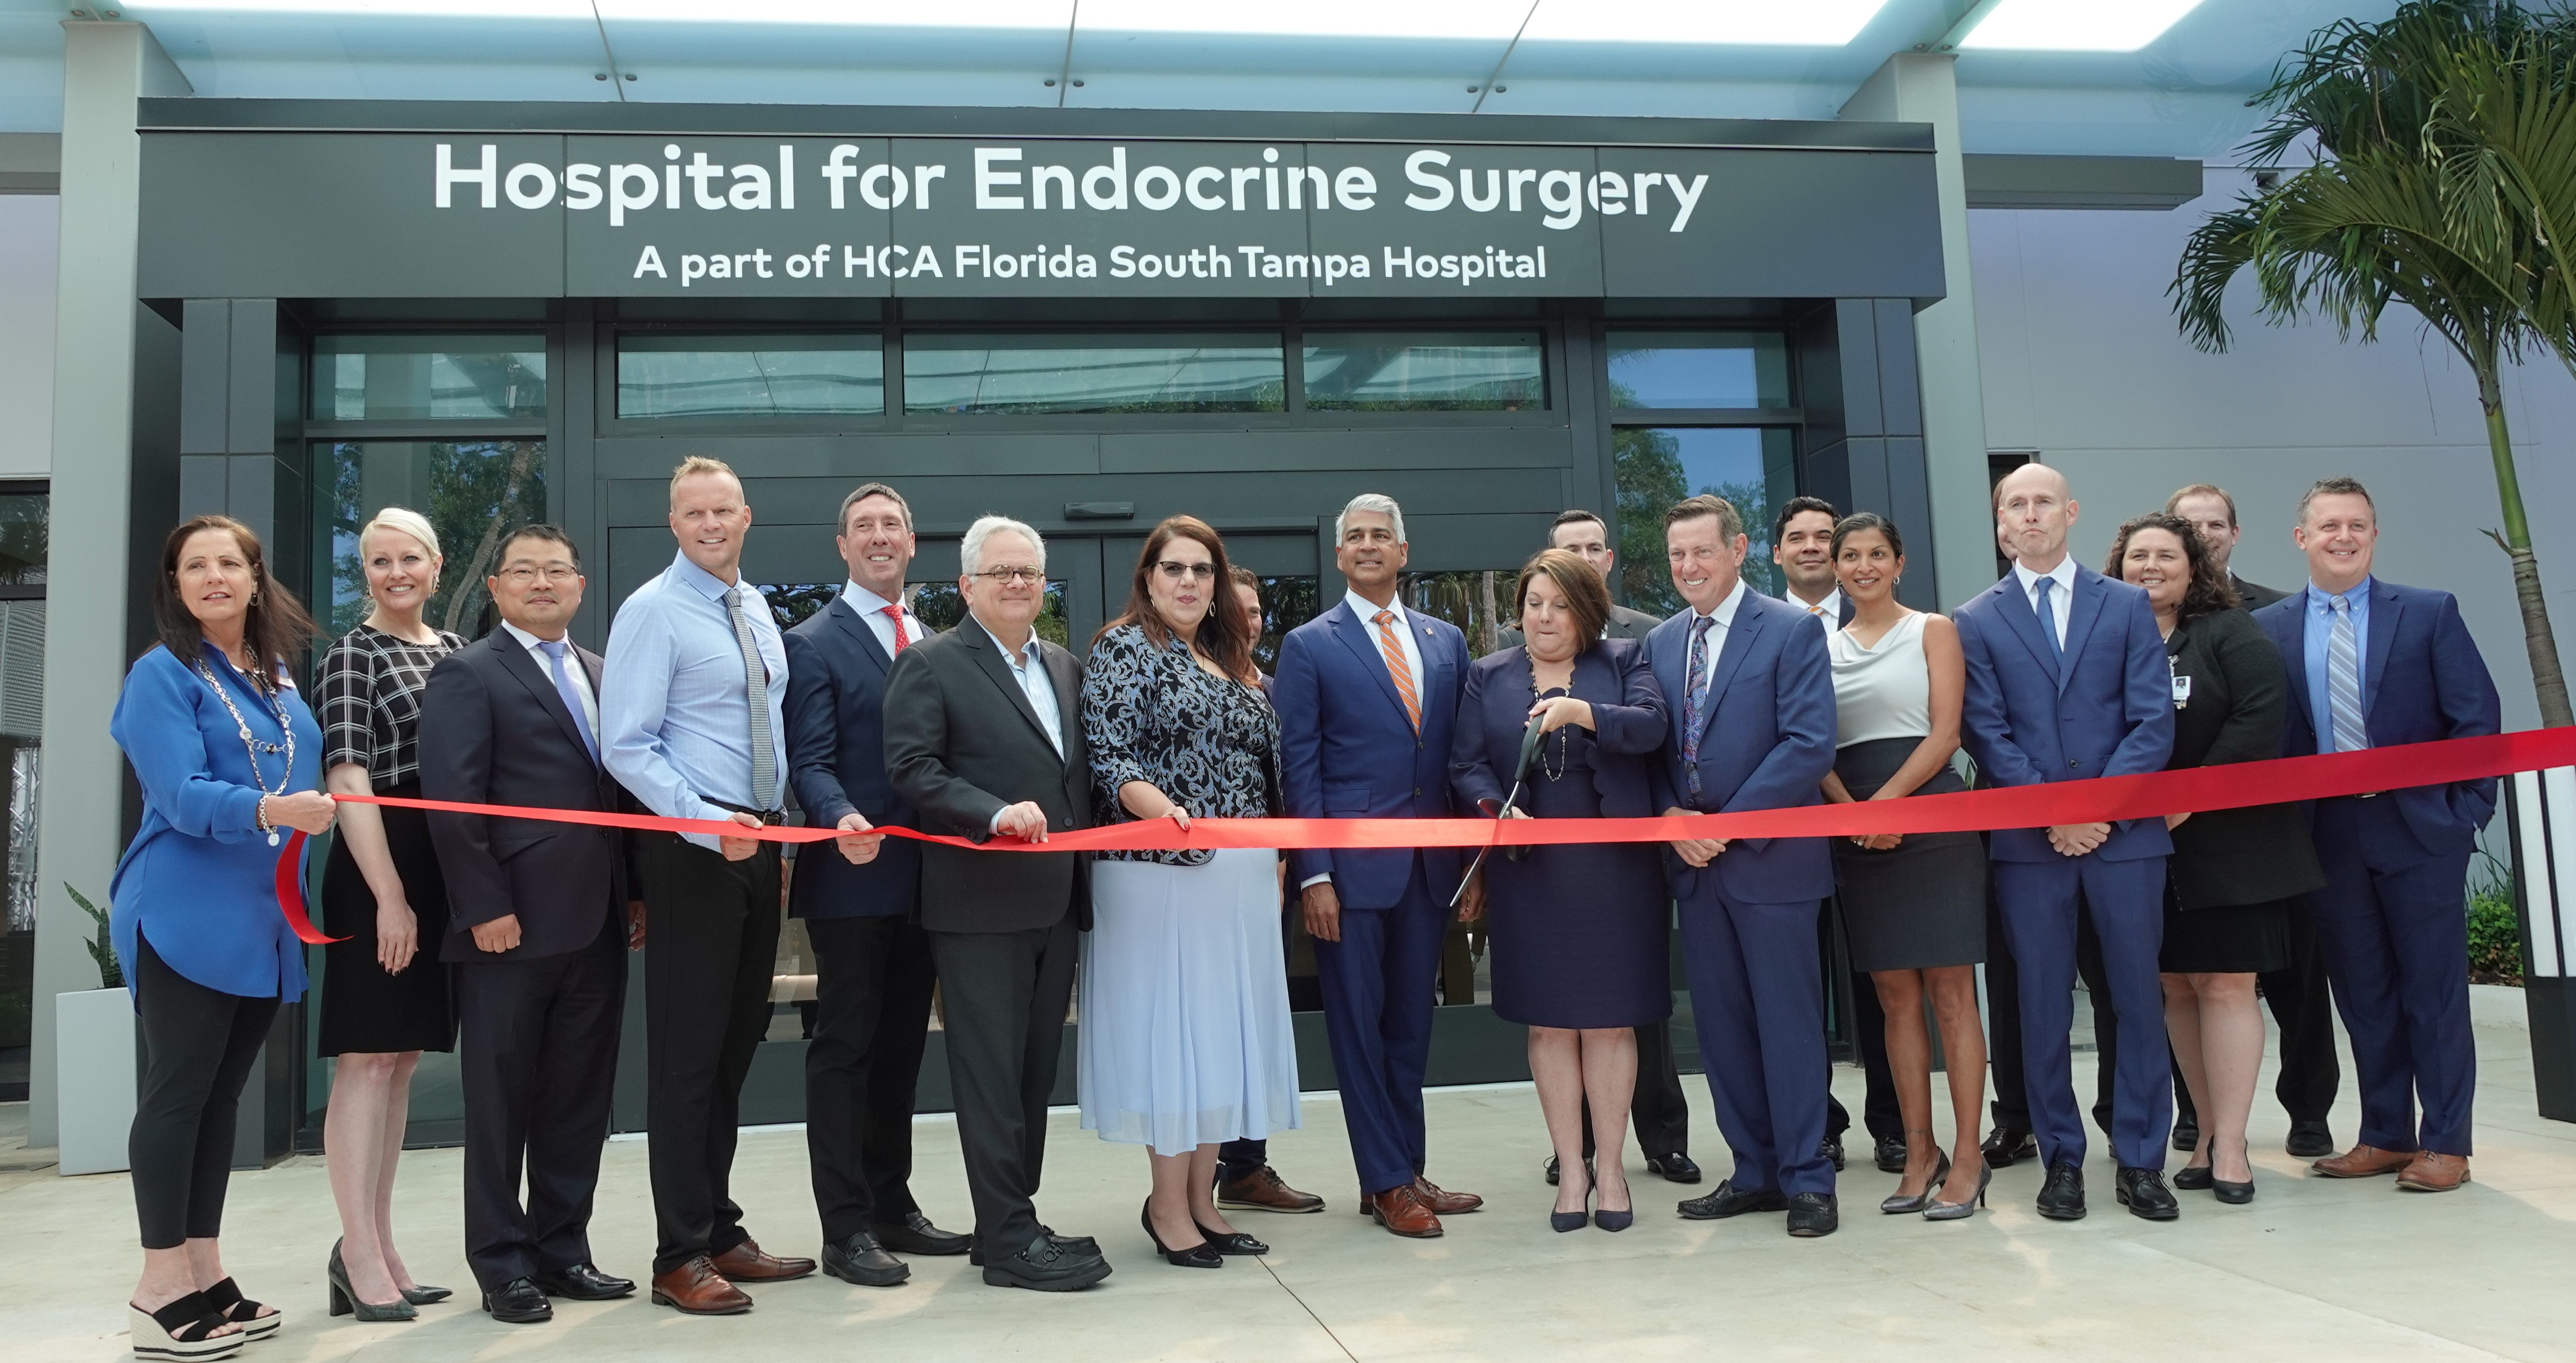 Surgeons of the Norman Parathyroid Center, Clayman Thyroid Center, Carling Adrenal Center unite at the Hospital for Endocrine Surgery in Tampa, Florida